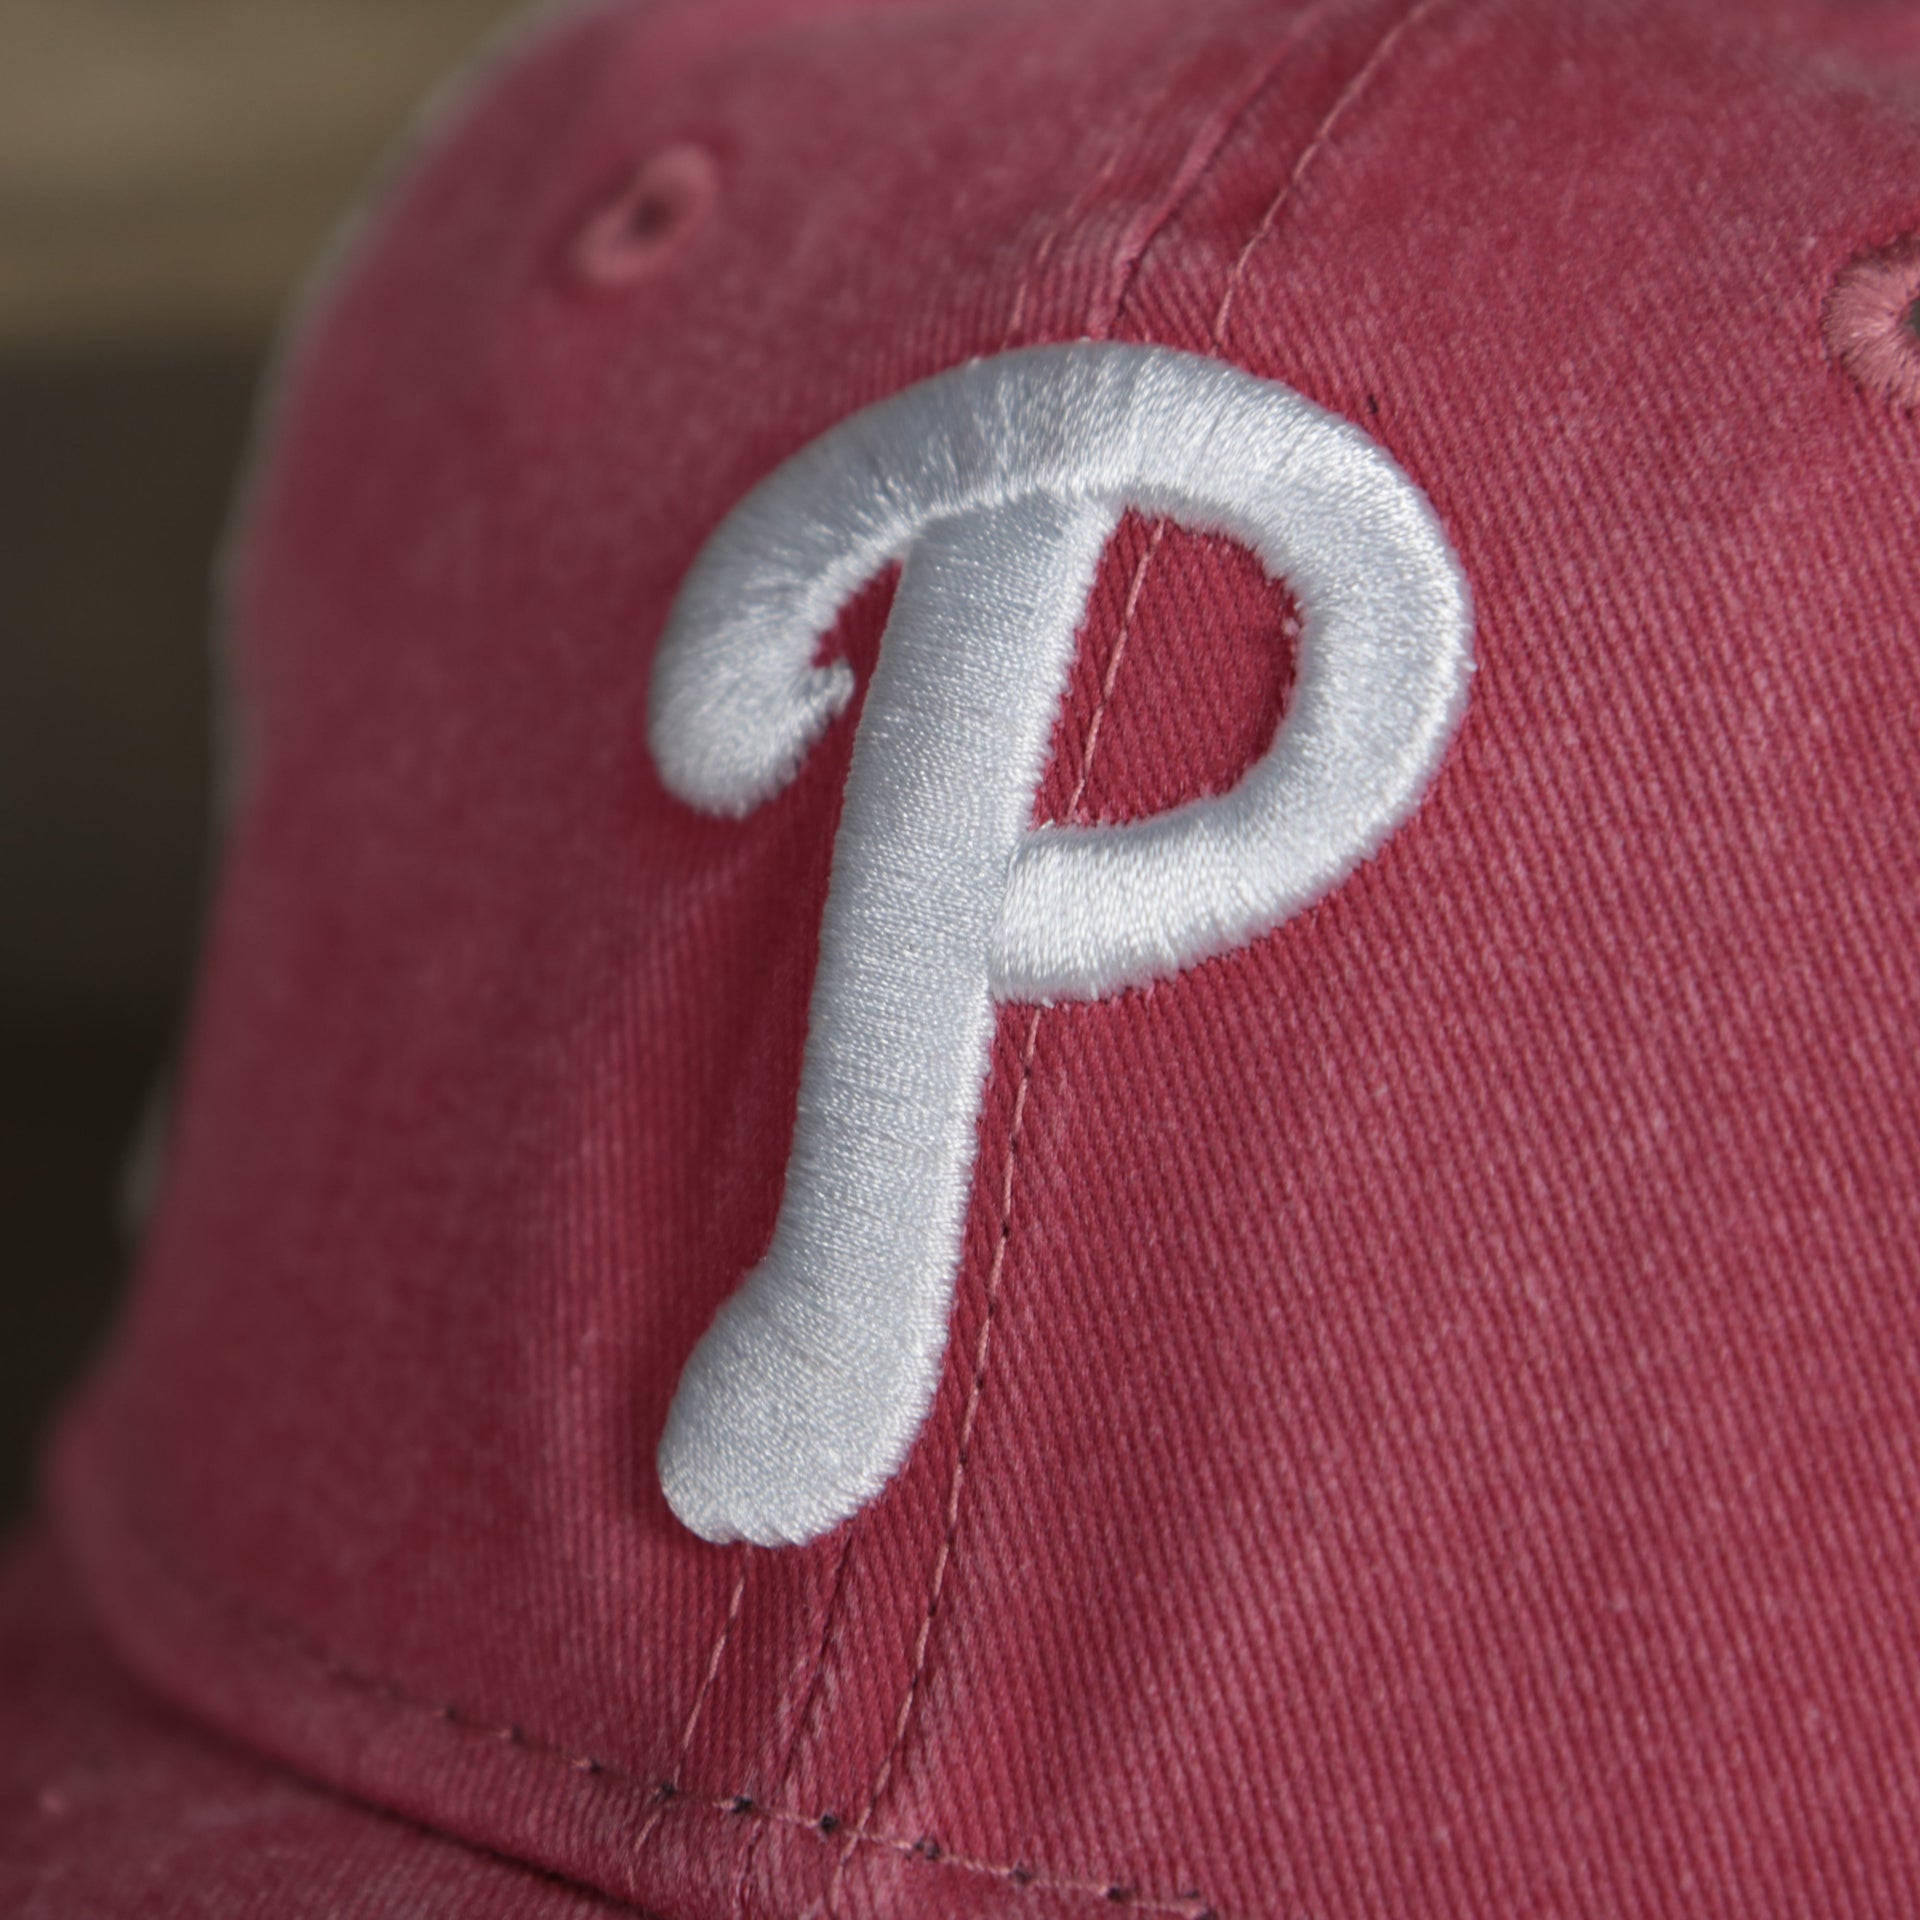 A close up of the Phillies logo on the Philadelphia Phillies New Era 9Twenty Washed Trucker Youth hat